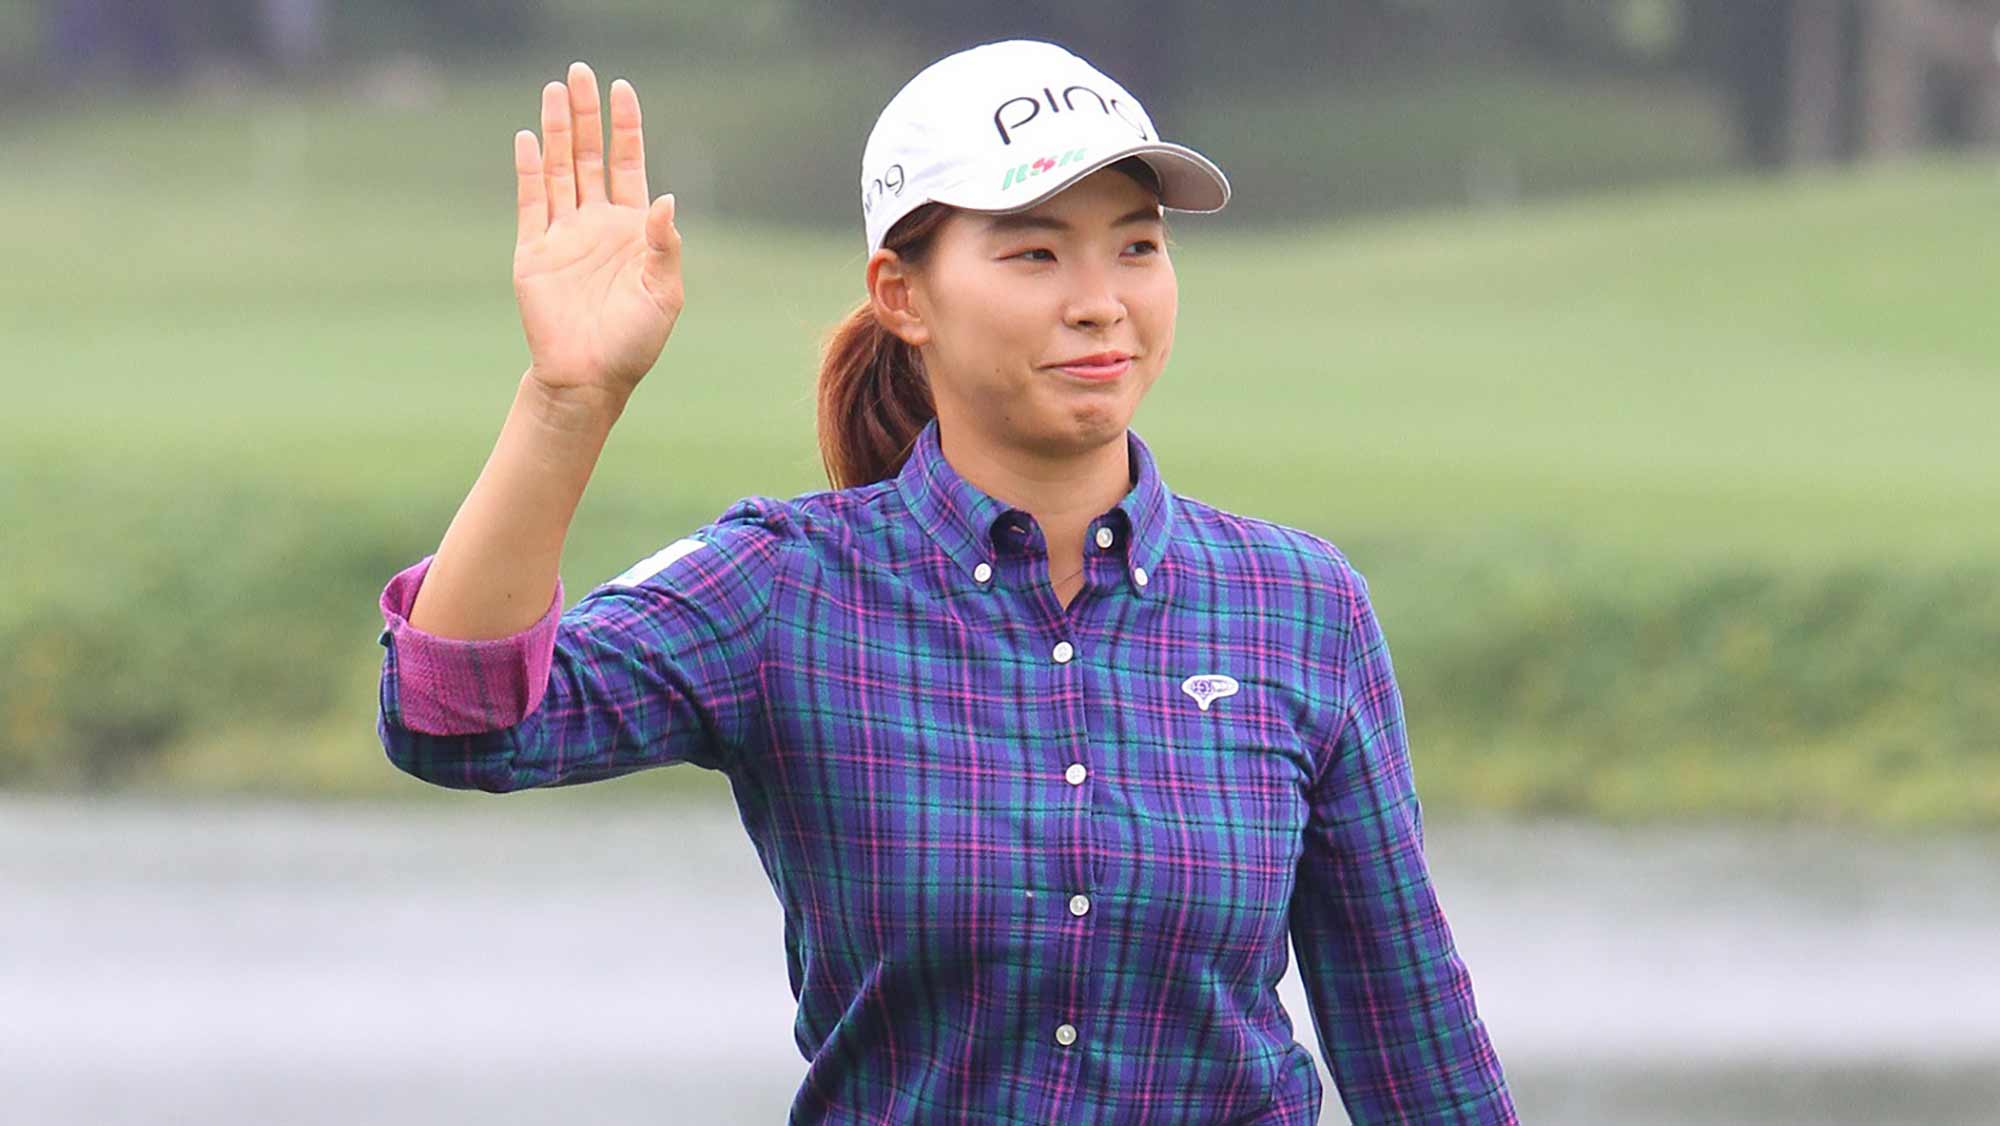 Hinako Shibuno waves during a practice round at the 2019 Taiwan Swinging Skirts LPGA presented by CTBC